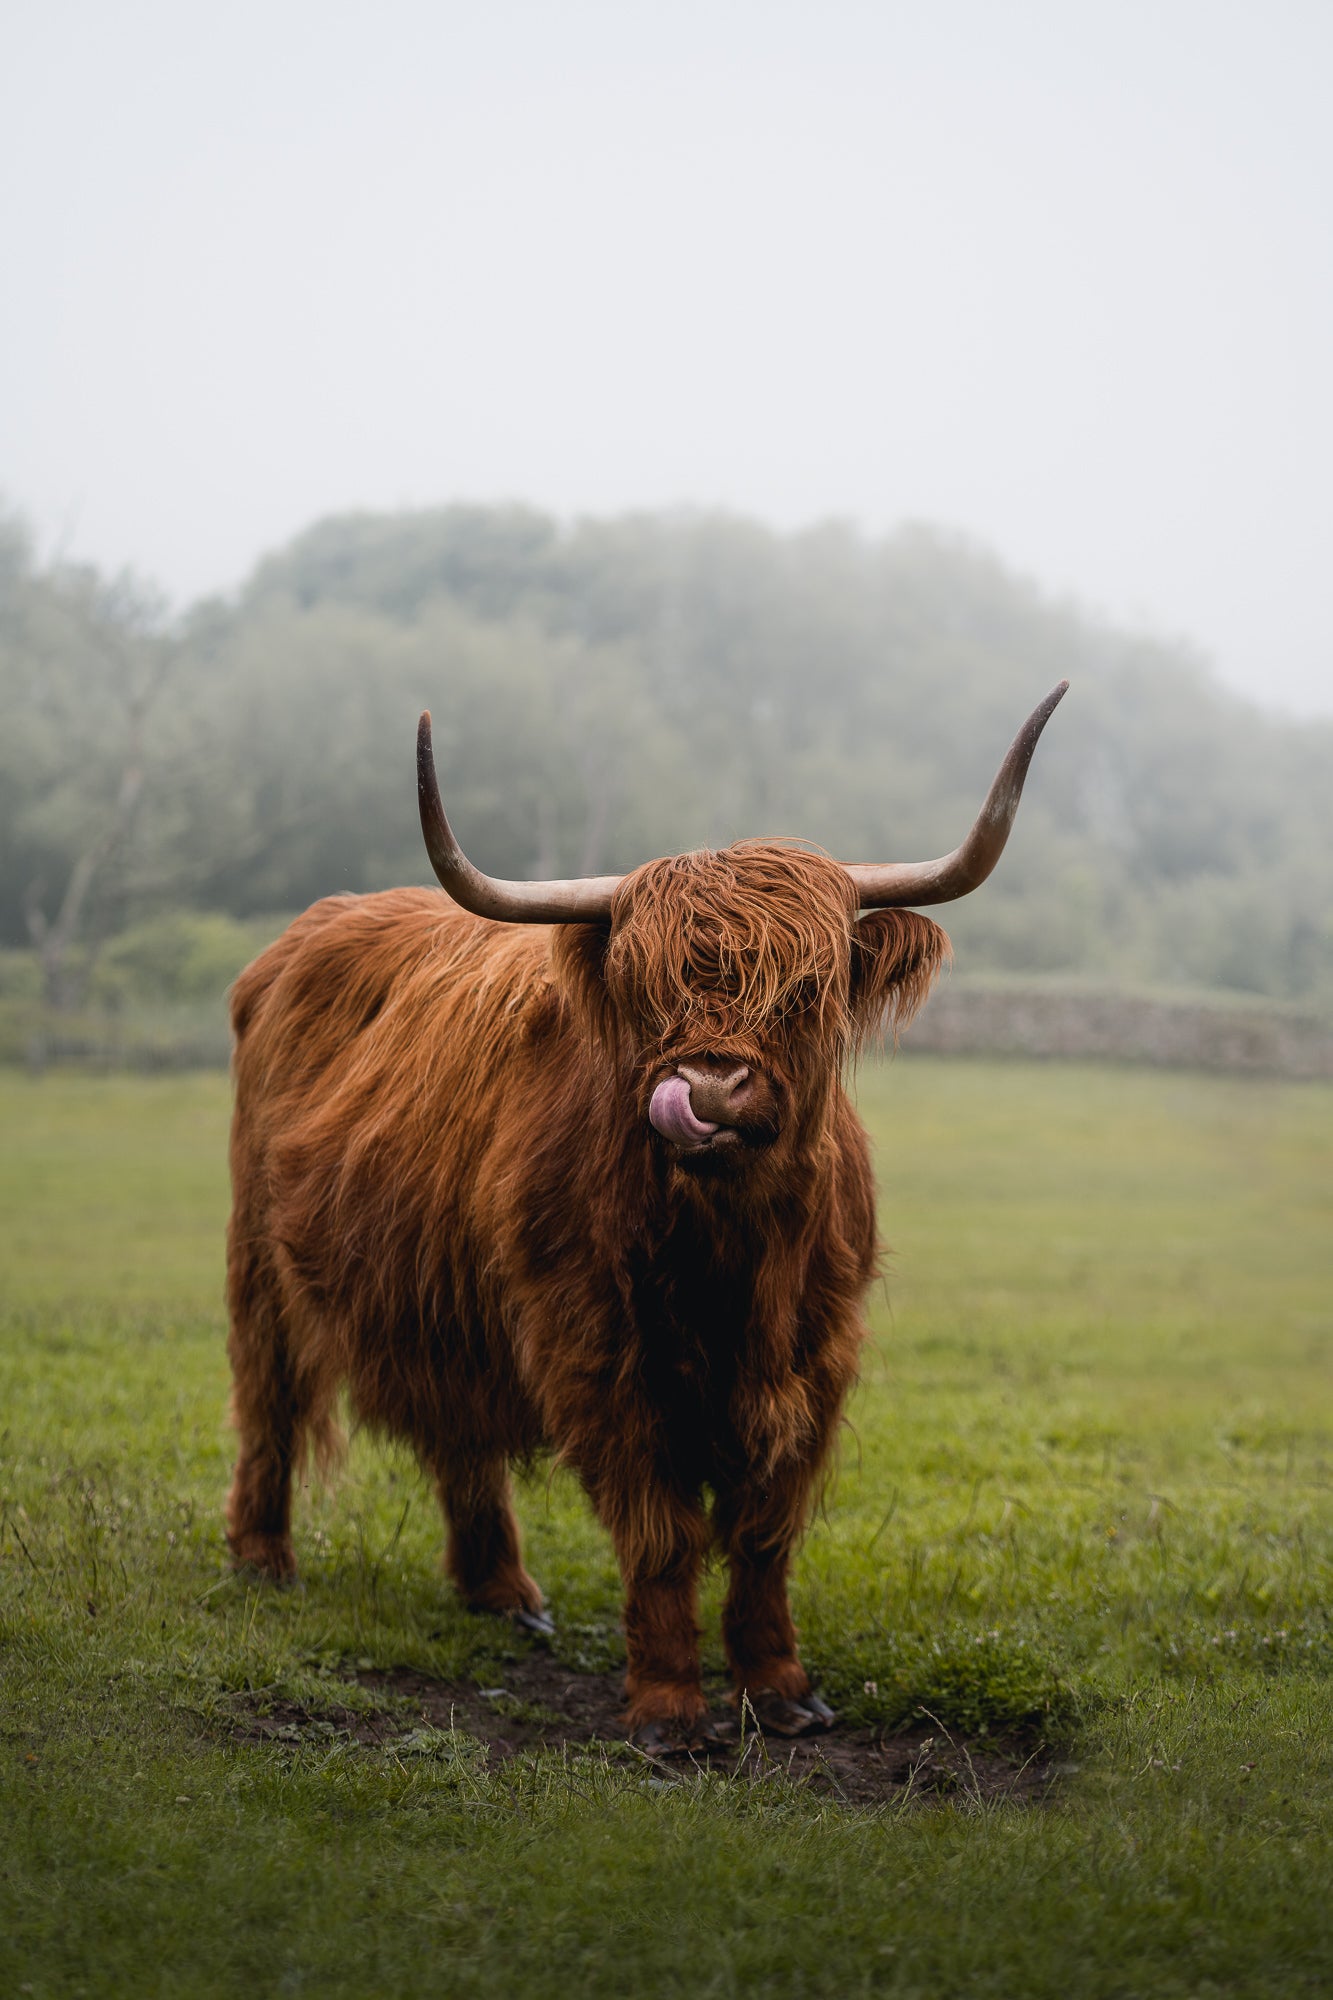 “Highland Cow, a beautiful cow found in my local county of Northumberland.” Photo by Daryl Scott Walker. Sony Alpha 7 III. Sony 85mm f/1.8. 1/800-sec, f/2.8, ISO 100